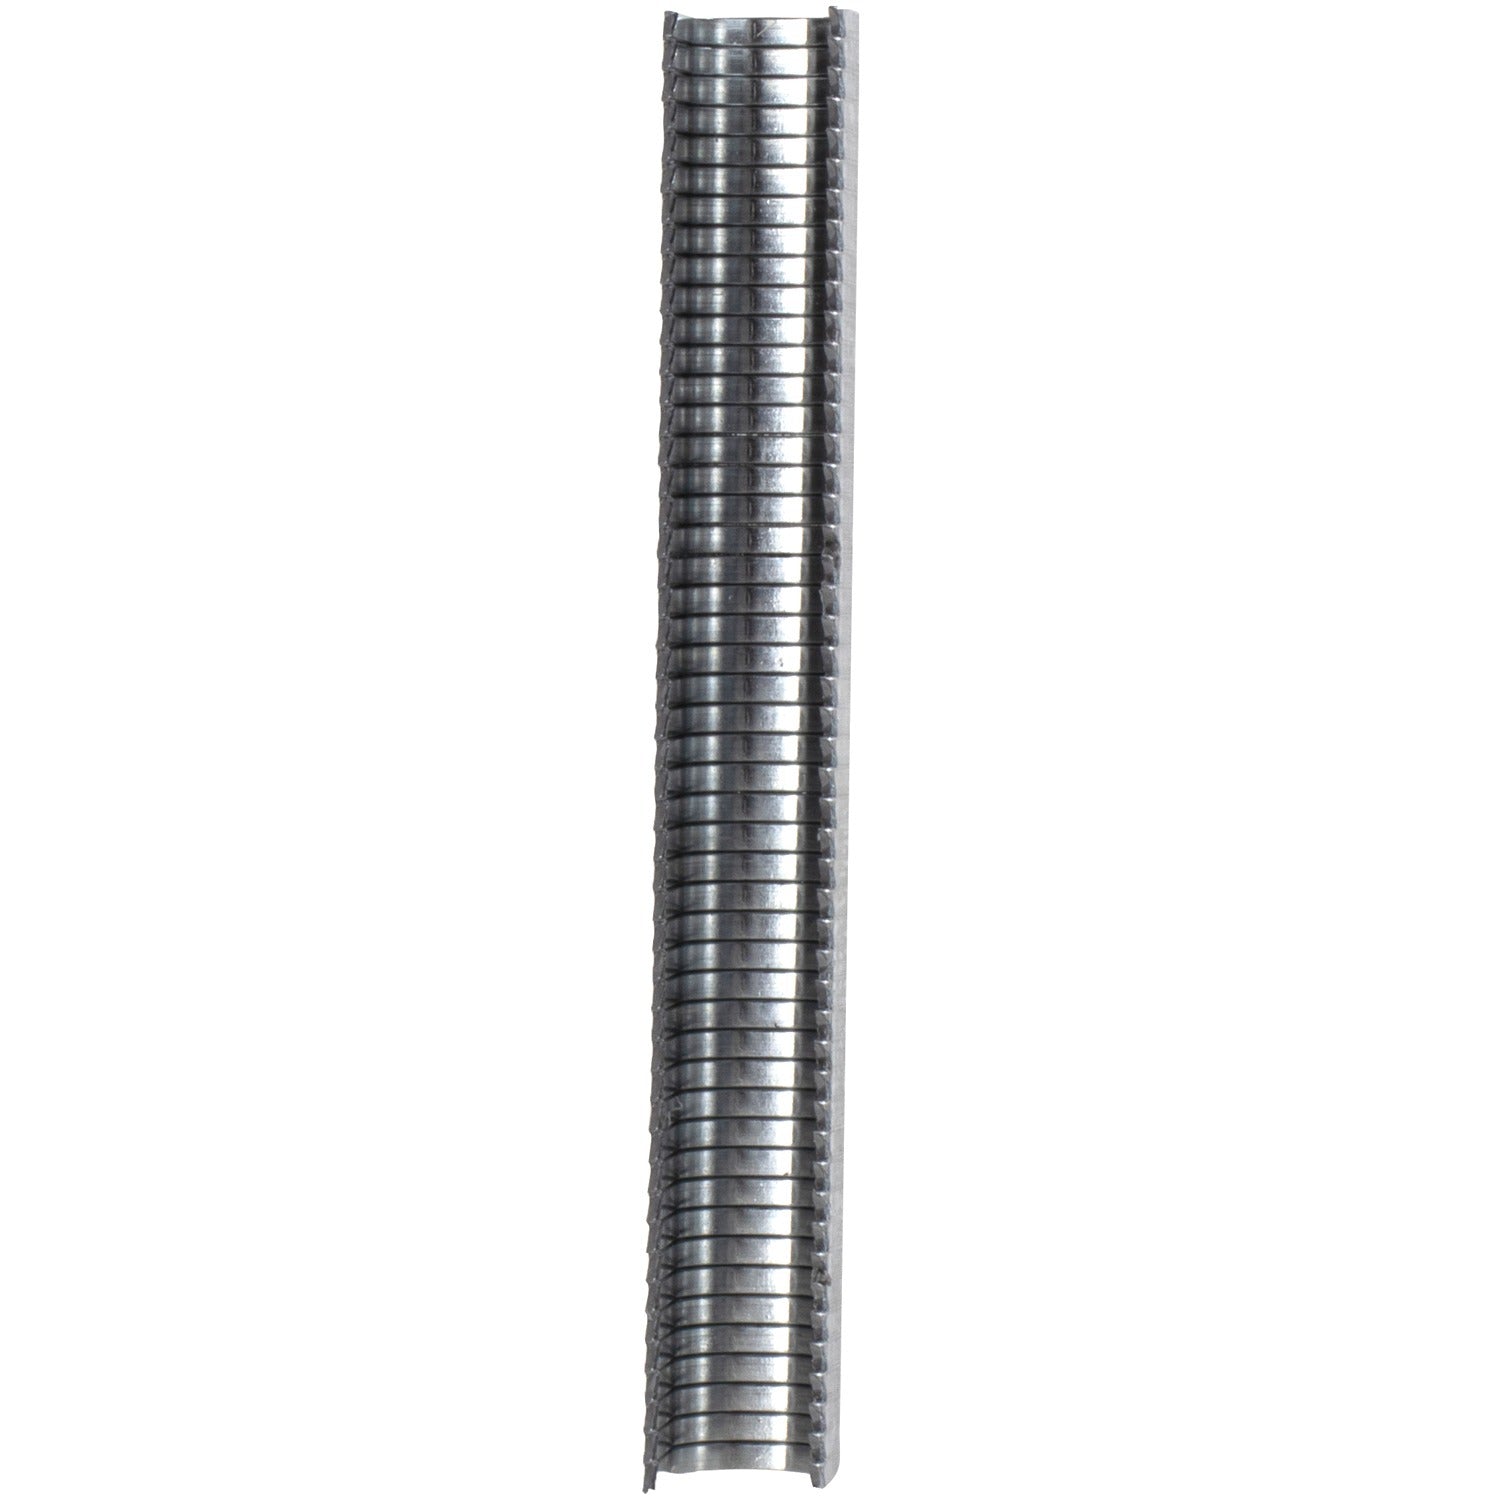 Arrow 256 T25 Round Crown Staples, 1,000 Pack (3/8 Inch)